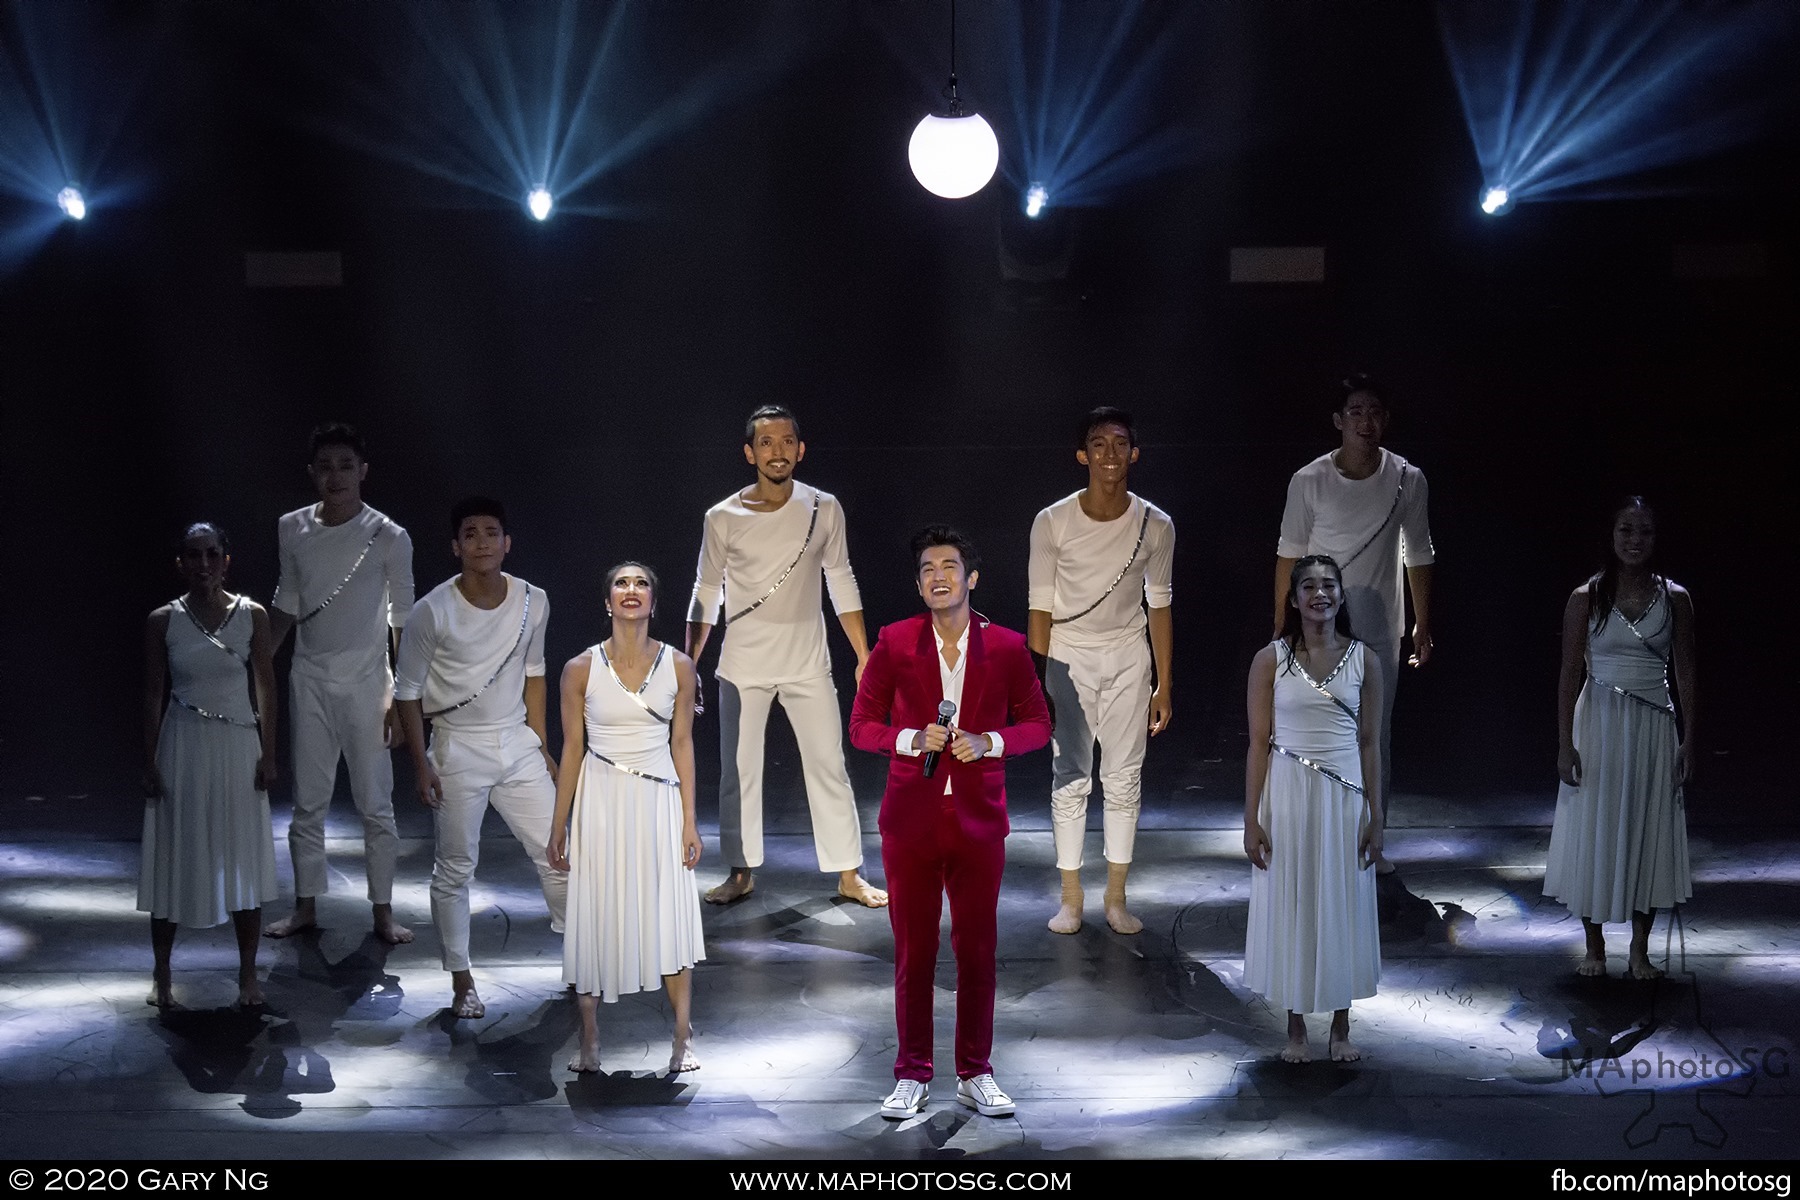 "Everything I Am", composed by Joshua Wan, is performed by Nathan Hartono at the NDP 2020 Evening Show.